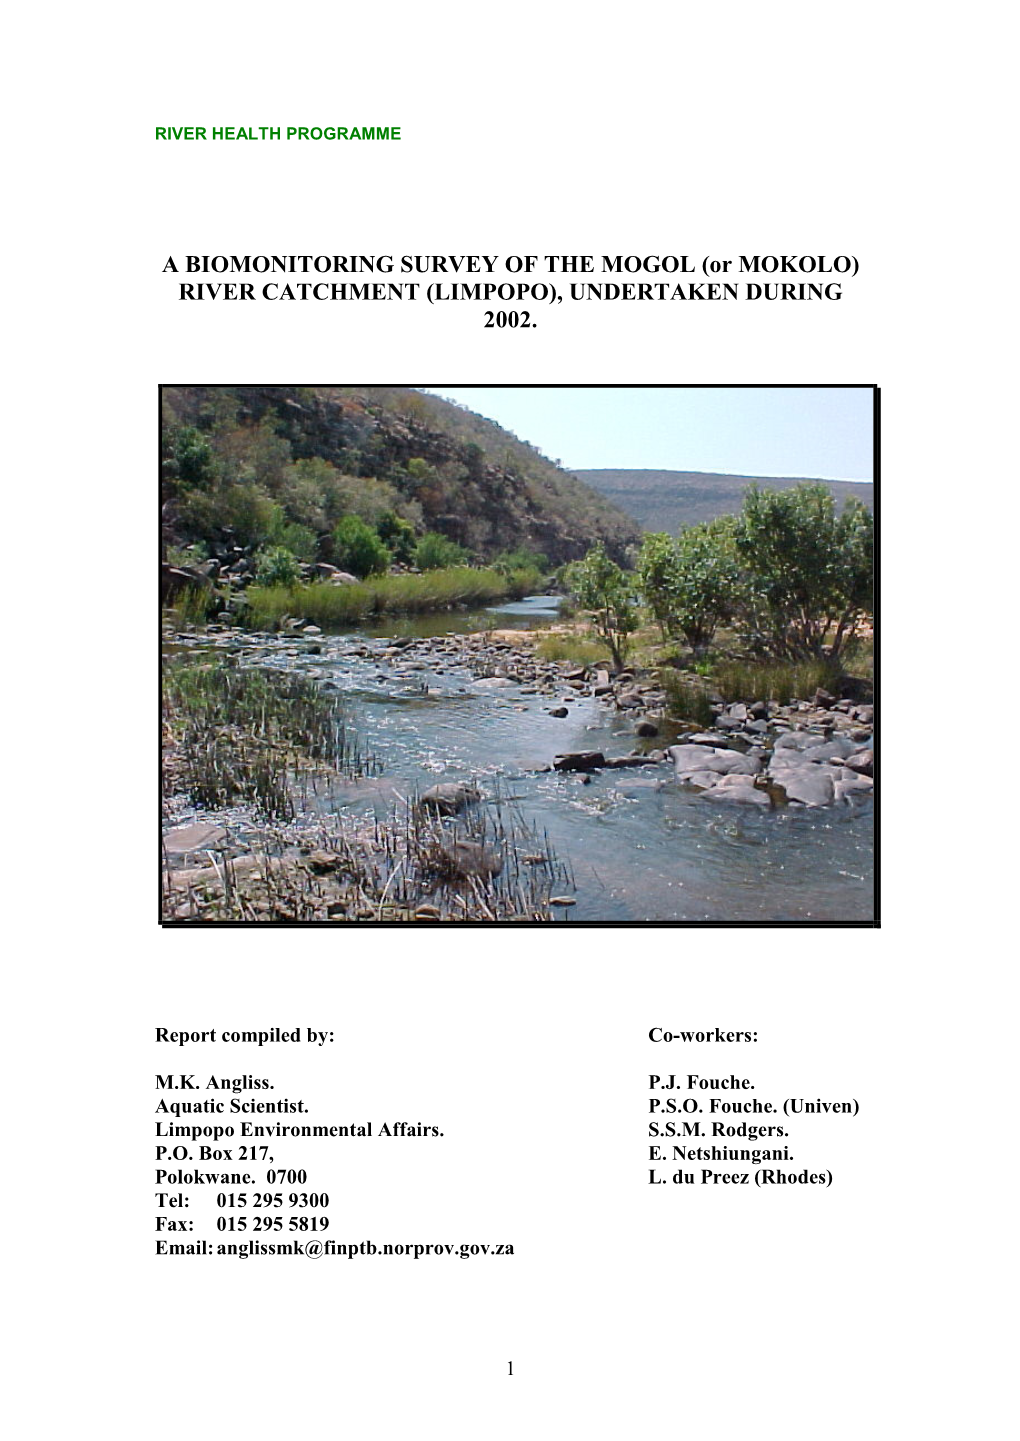 (Or MOKOLO) RIVER CATCHMENT (LIMPOPO), UNDERTAKEN DURING 2002